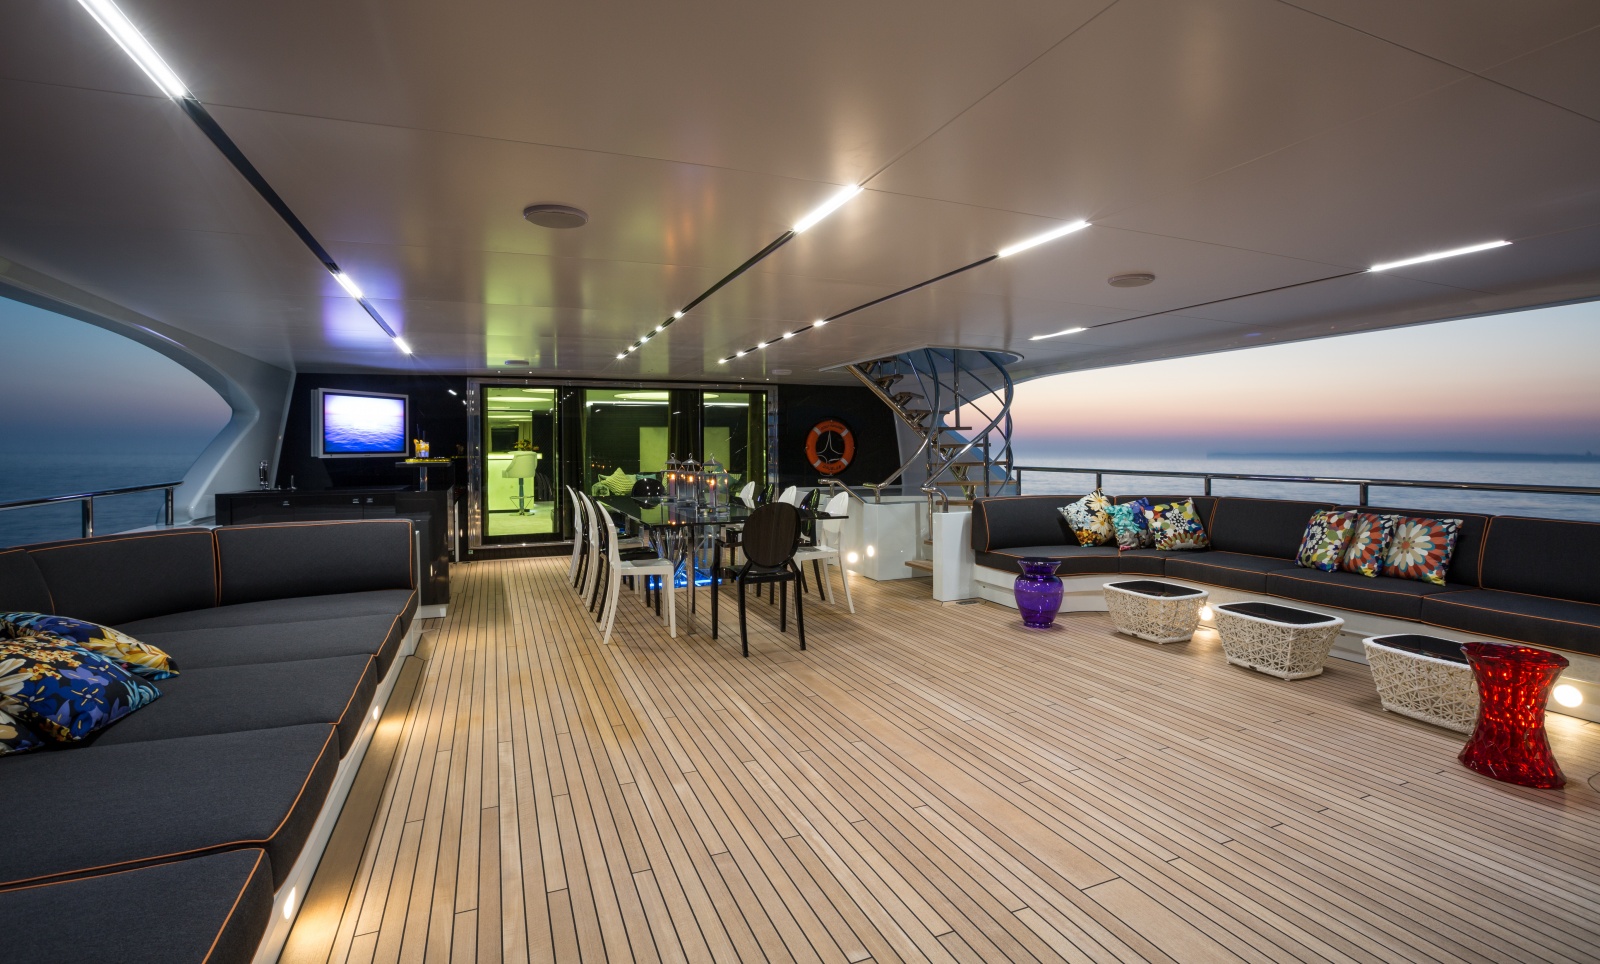 Take a look inside the largest boat at the Cannes yachting festival